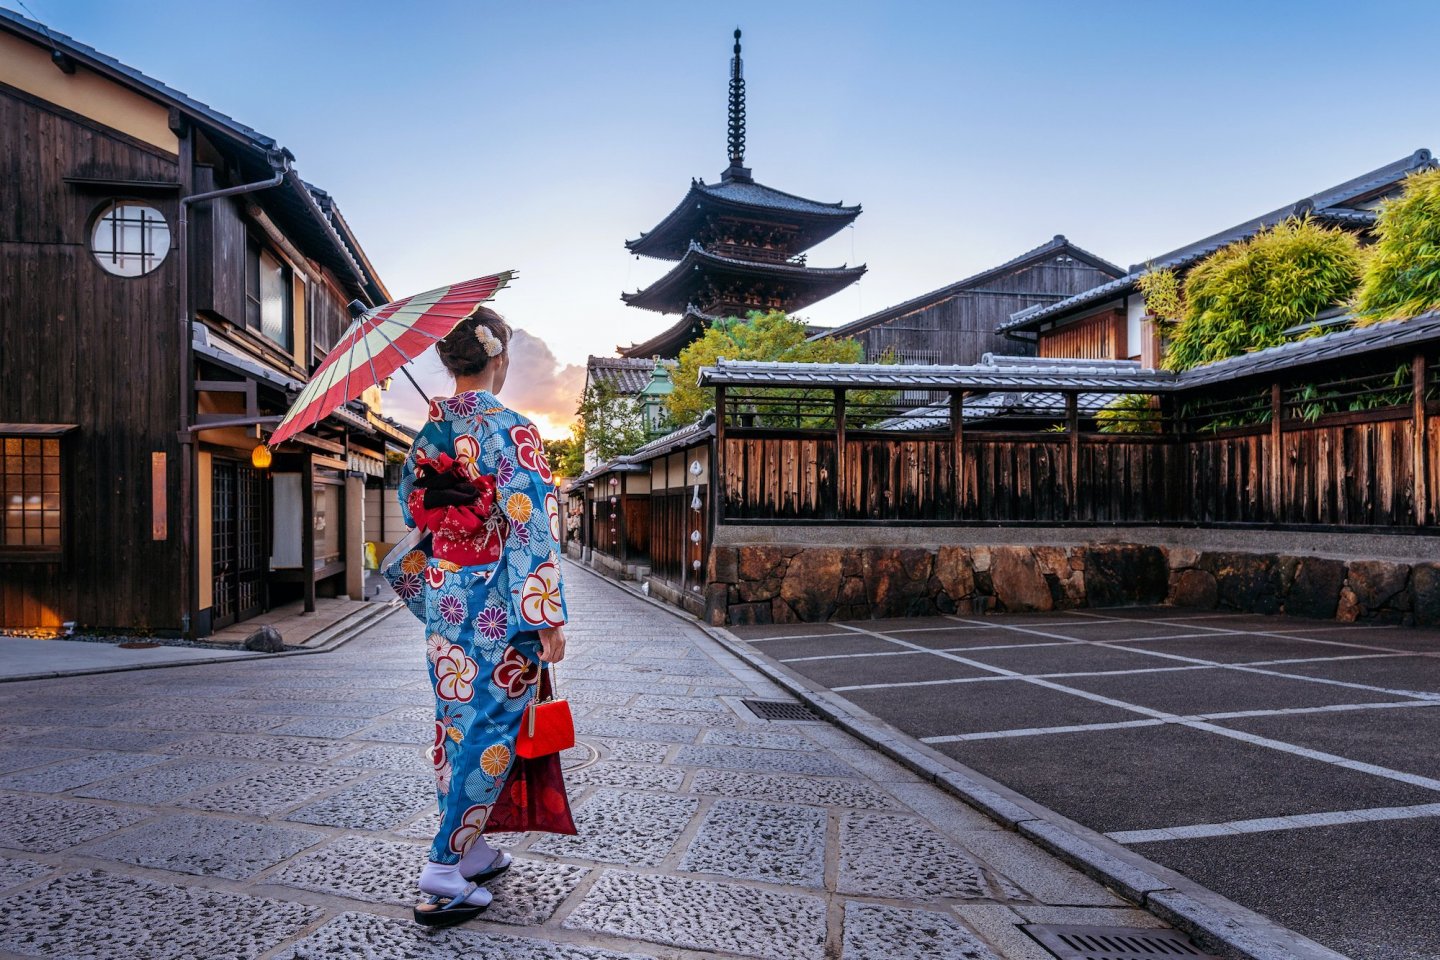 Kyoto Guide: Things to do in Kyoto - Japan Travel